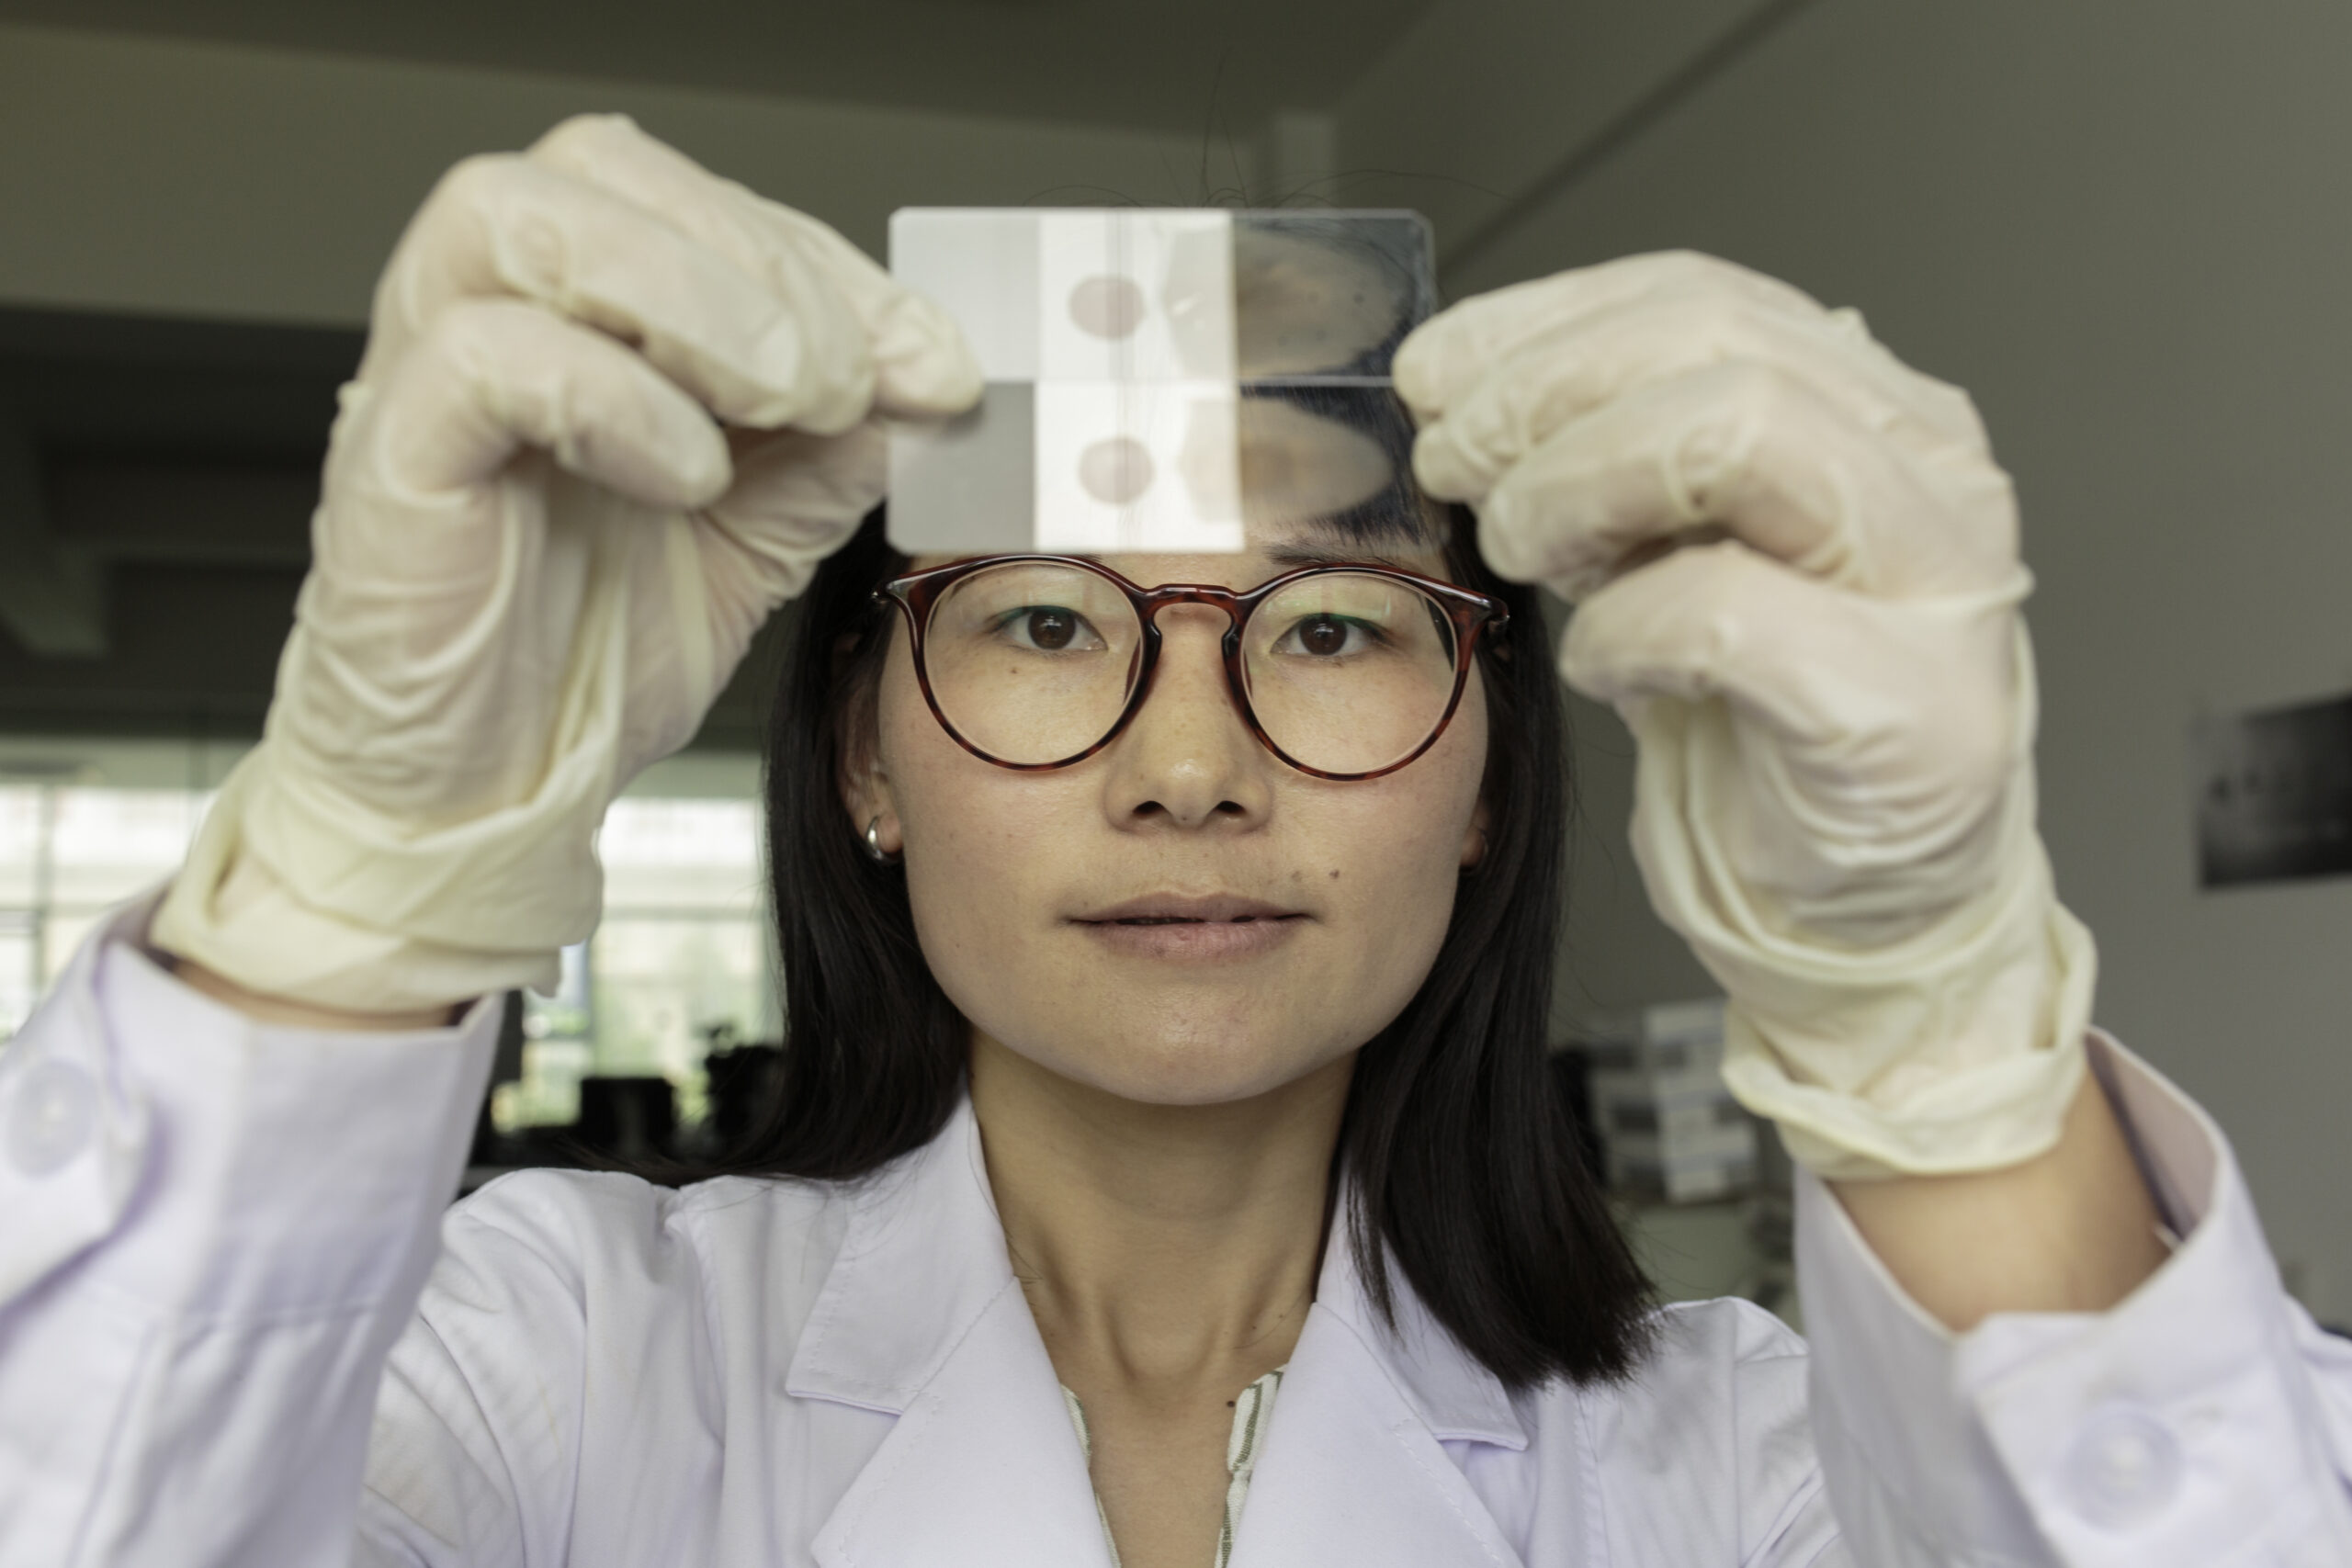 Xu Yanchun, a laboratory specialist, holds blood smears that she will examine for malaria parasites. Rapid diagnosis of malaria is a key aspect of the “1-3-7” strategy. Yunnan Institute for Parasitic Diseases, Pu'er Simao, Yunnan. April 2019.